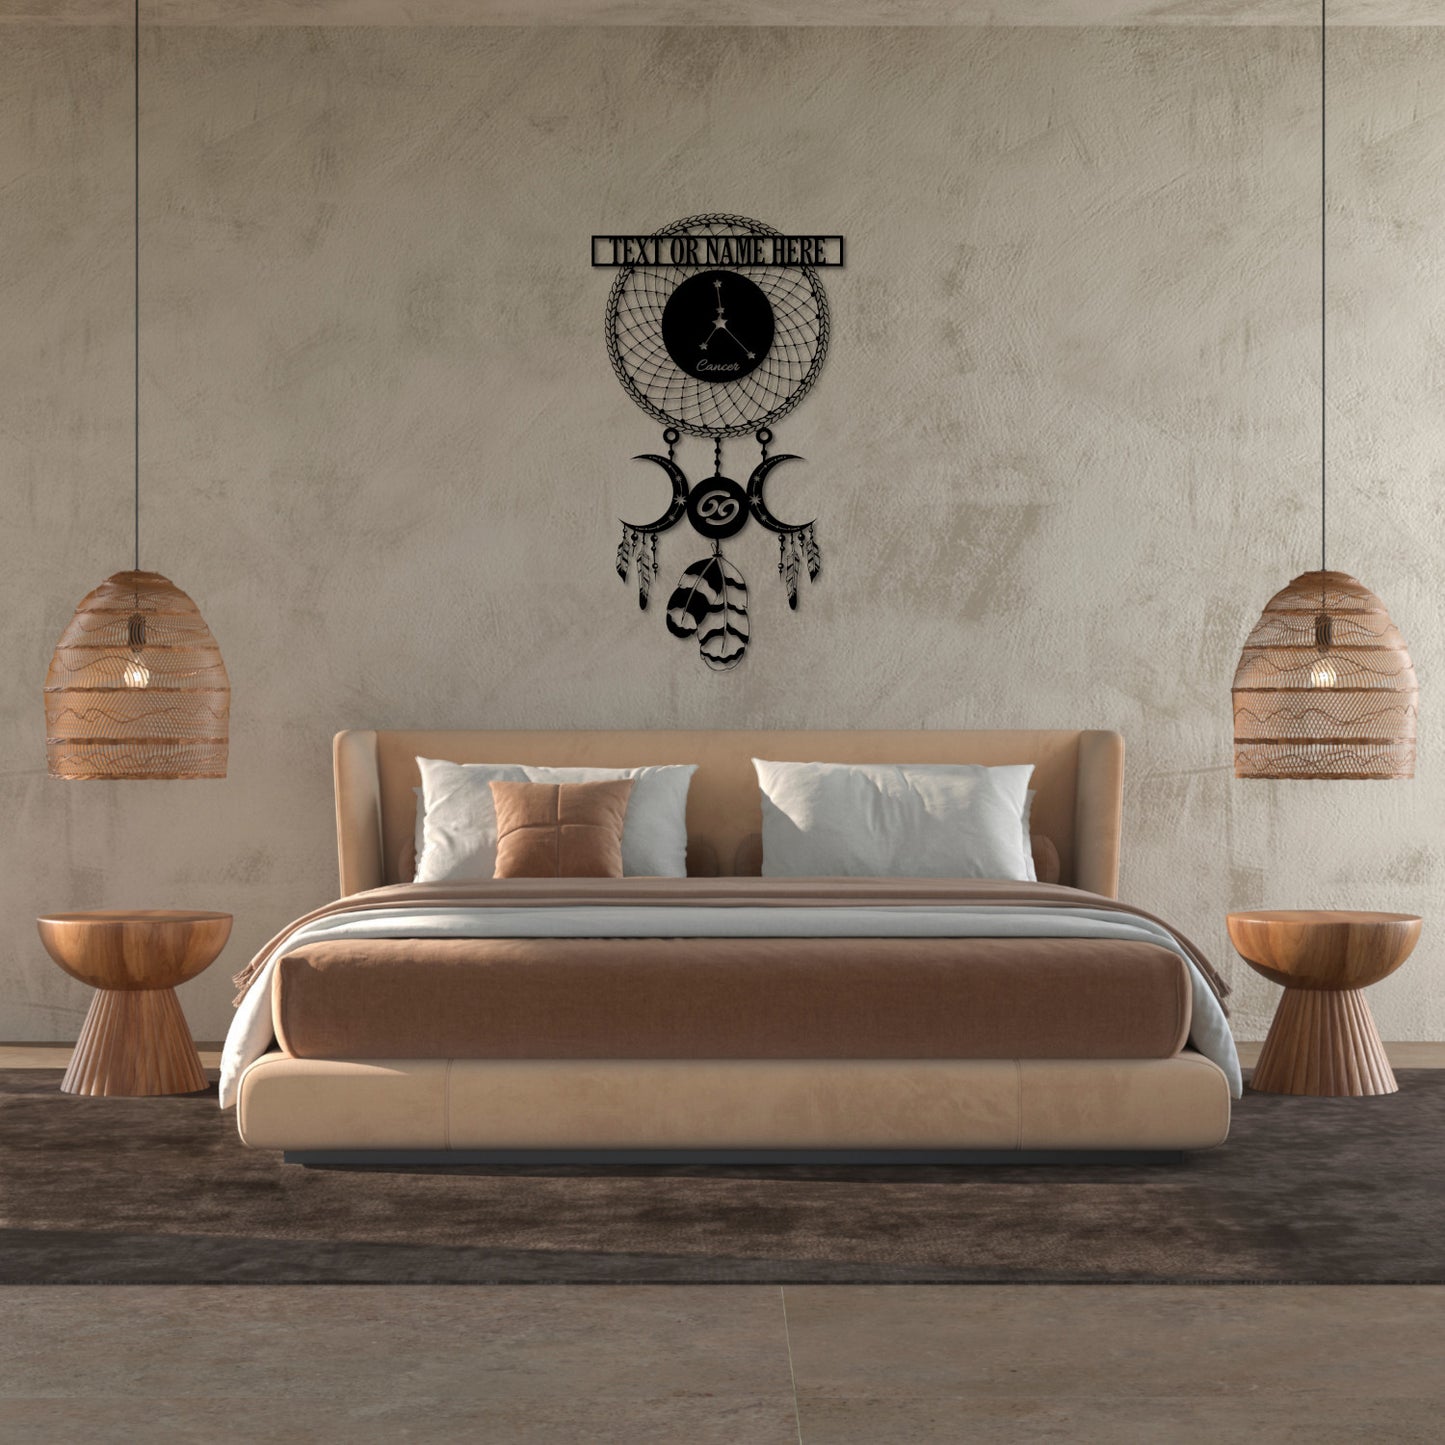 Personalized Cancer Naem Metal Sign | Custom Zodiac Horoscope Name Gift | Cancer Constellation Bedroom Decor | Dreamcatcher Astrology Gift